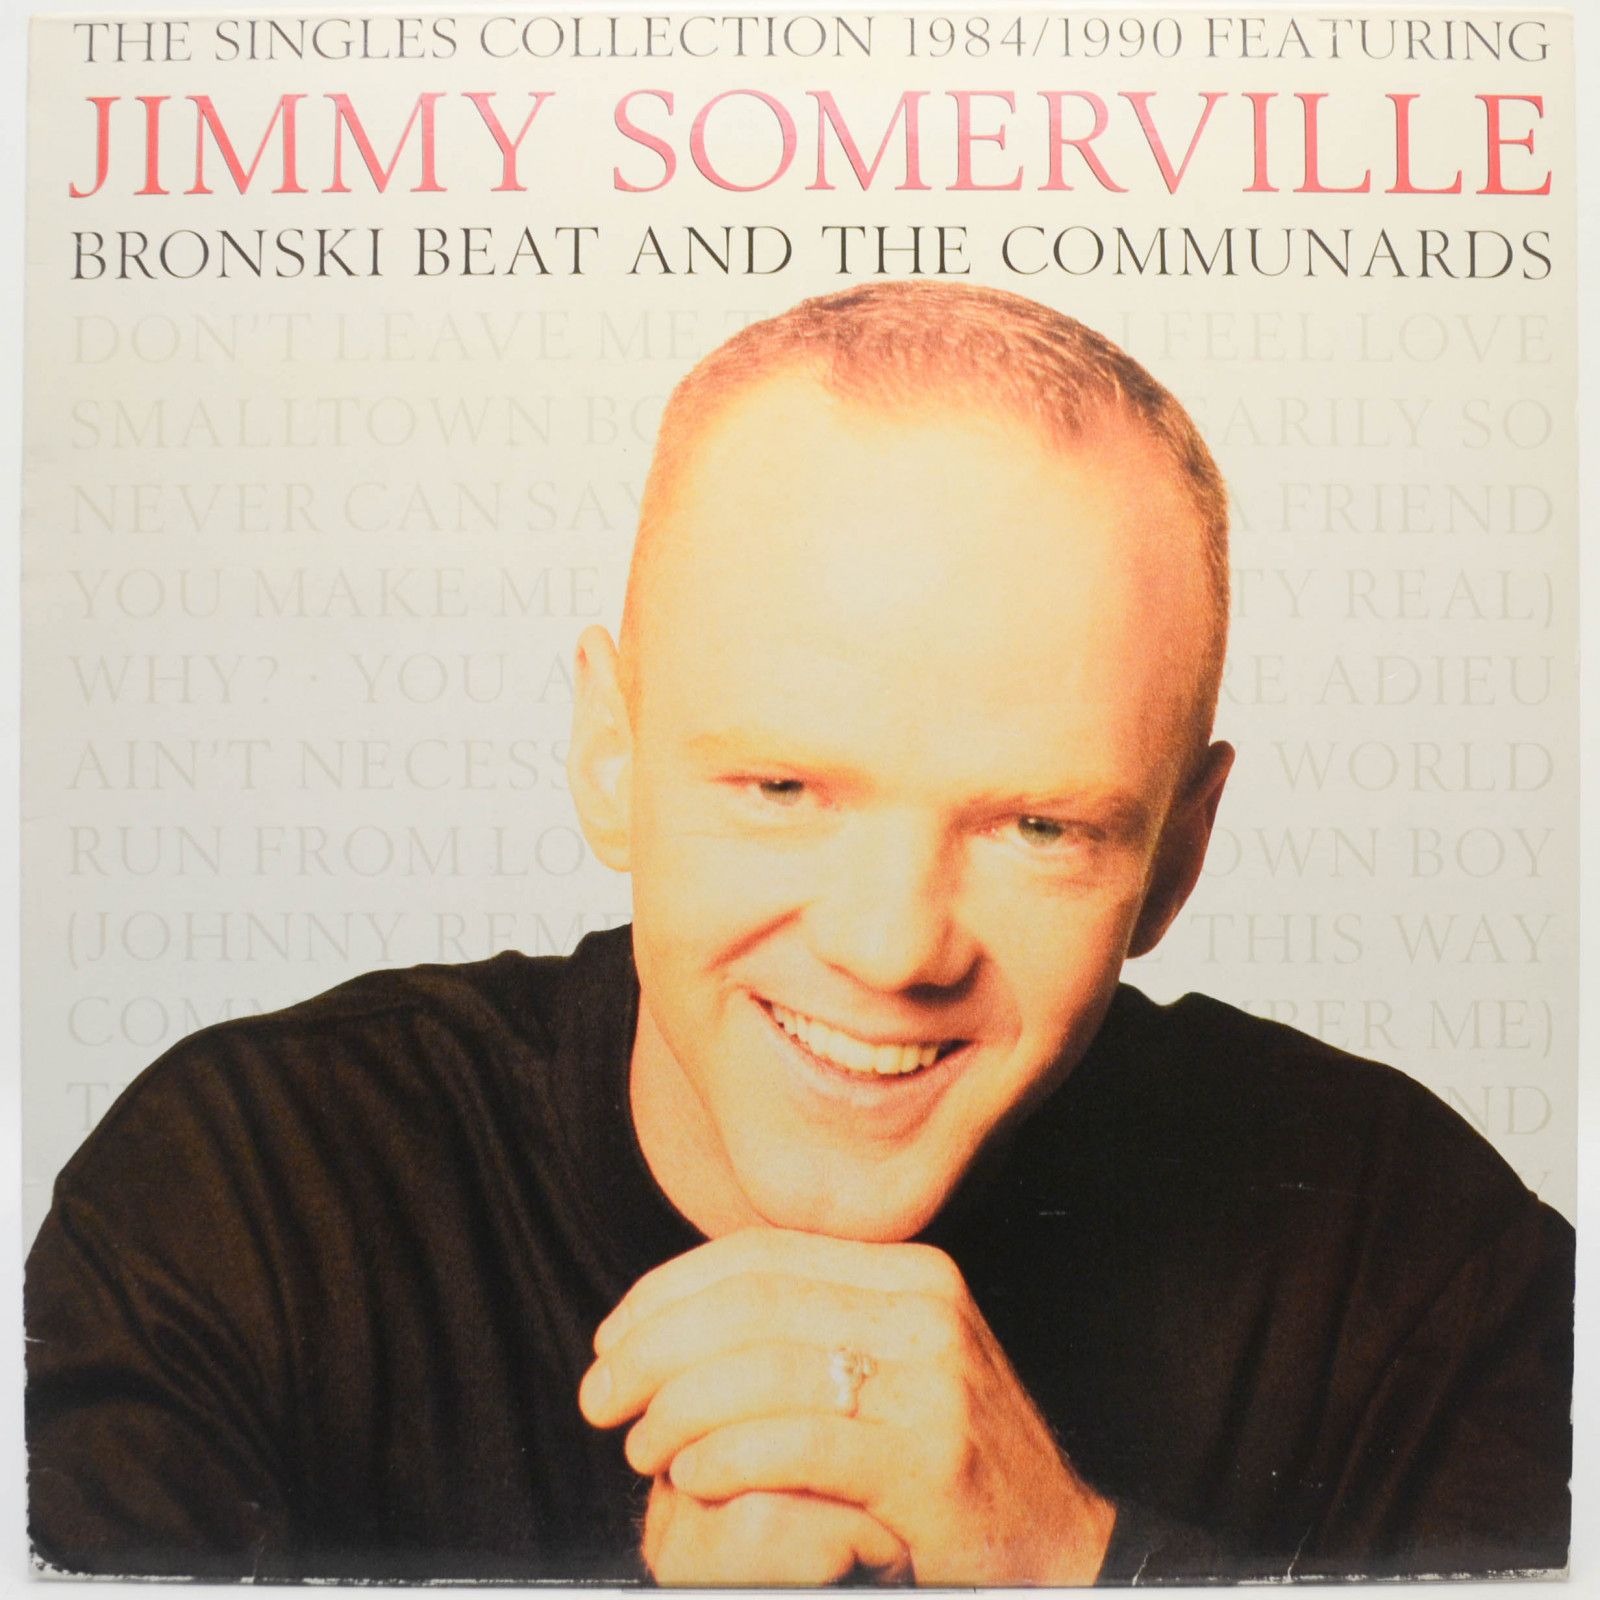 Jimmy Somerville Featuring Bronski Beat And The Communards — The Singles Collection 1984/1990, 1990